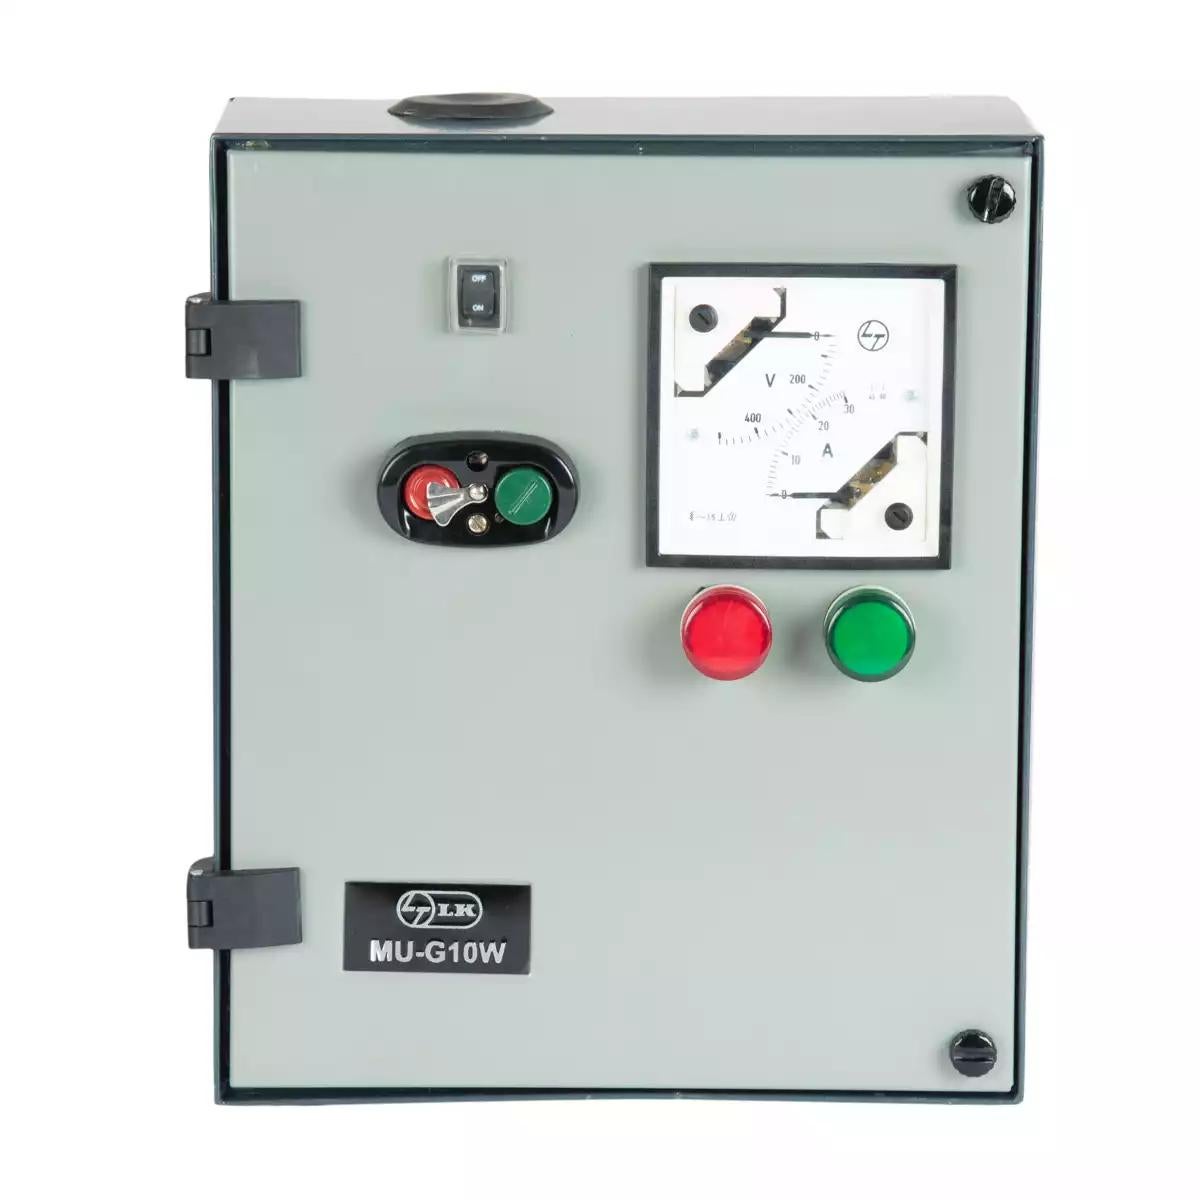 Three Phase DOL Controller with WLC for Submersible Pump Application,MU-G10W,10HP,DOL, CS91037DOCO